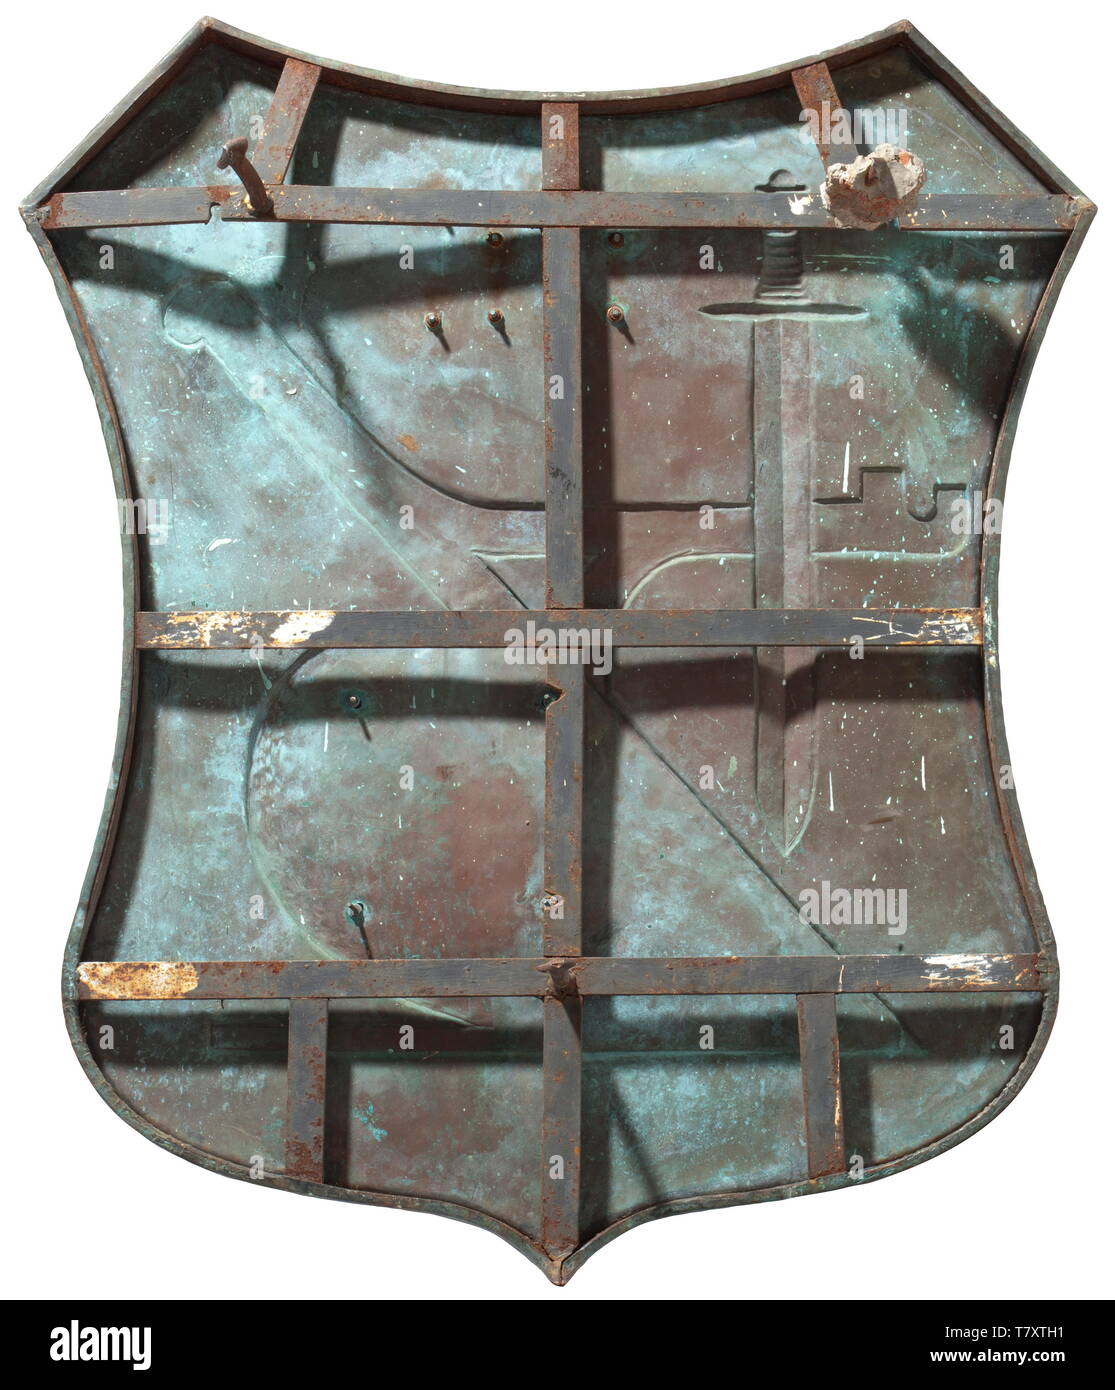 Heinrich Himmler - a farmstead shield 'Wehrbauer', Large sheet bronze escutcheon with depictions in relief of a ploughshare, a sword, SS runes and Himmler's initials 'HH', the reverse with braces and vestiges of cement. 87 x 96 cm. 'Wehrbauer' originally referred to farmers who lived in border areas so as to be able to defend them if needed. Himmler sought to revitalise this concept to unite it with his 'blood and soil' ideology and thus to literally build a 'human wall' around the borders of the German Reich. As a priority meritorious SS soldiers would be granted estates i, Editorial-Use-Only Stock Photo